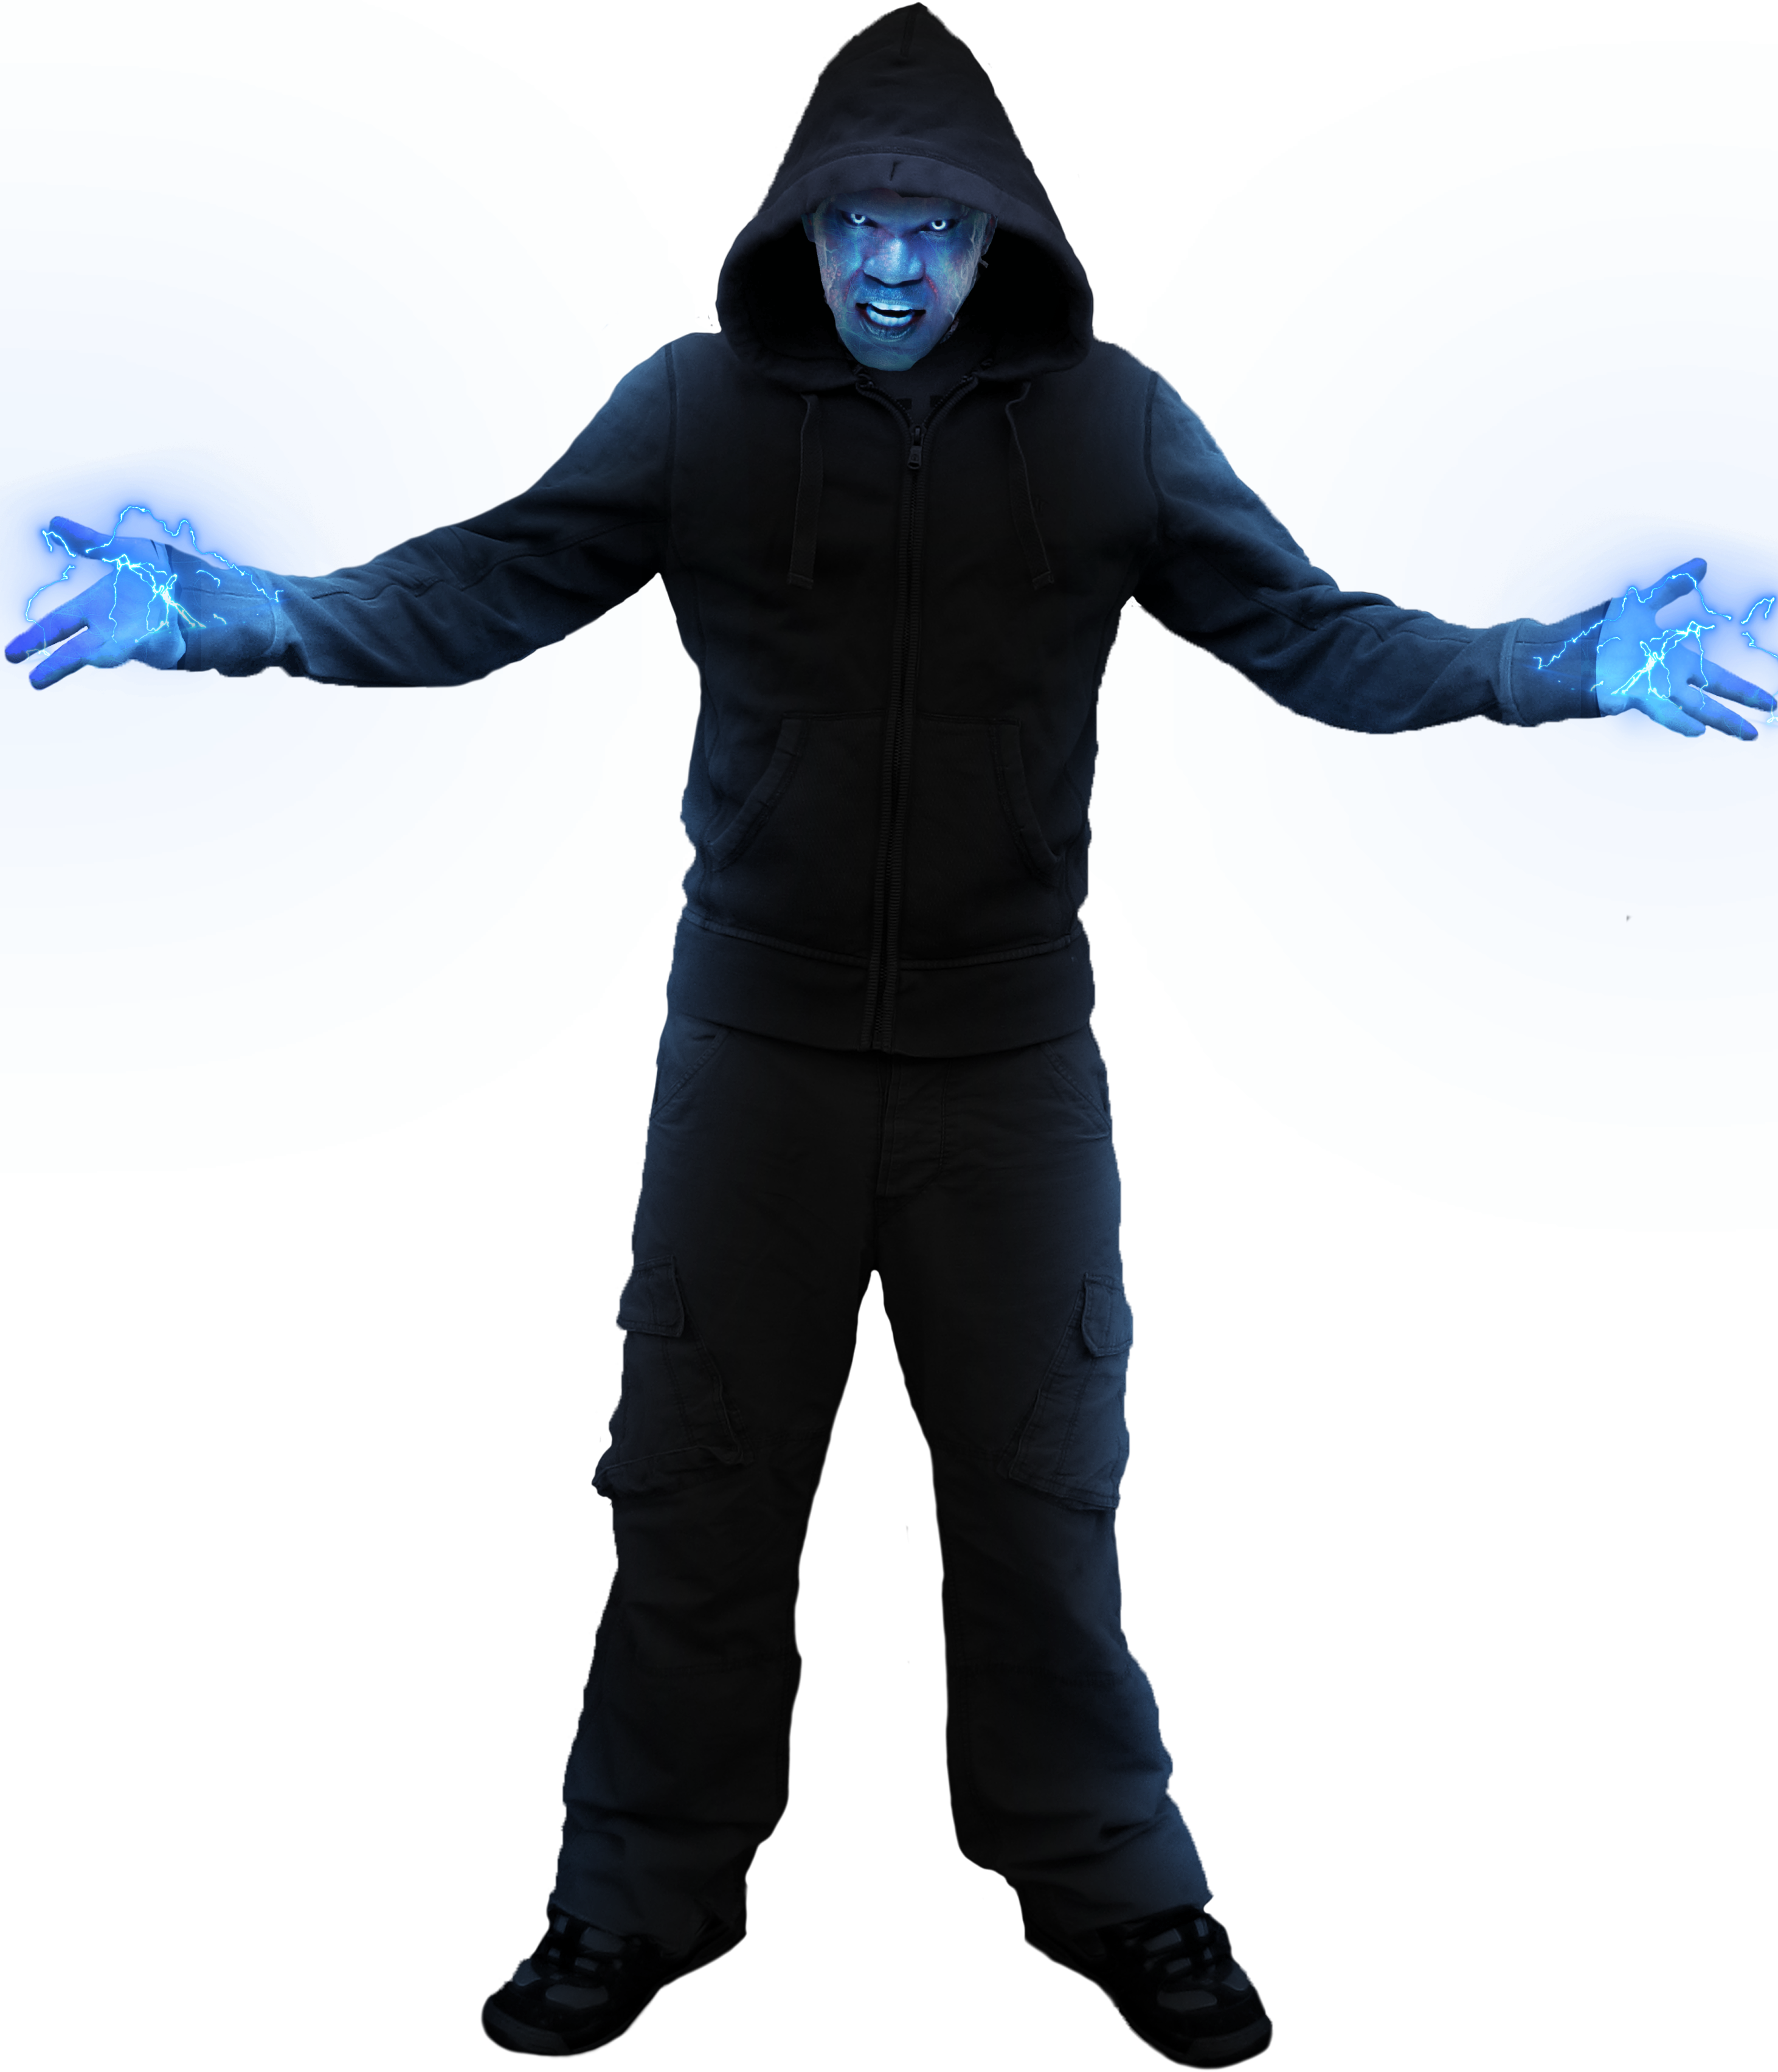 Electro (The Amazing Spider-Man 2) - PNG by DHV123 on DeviantArt